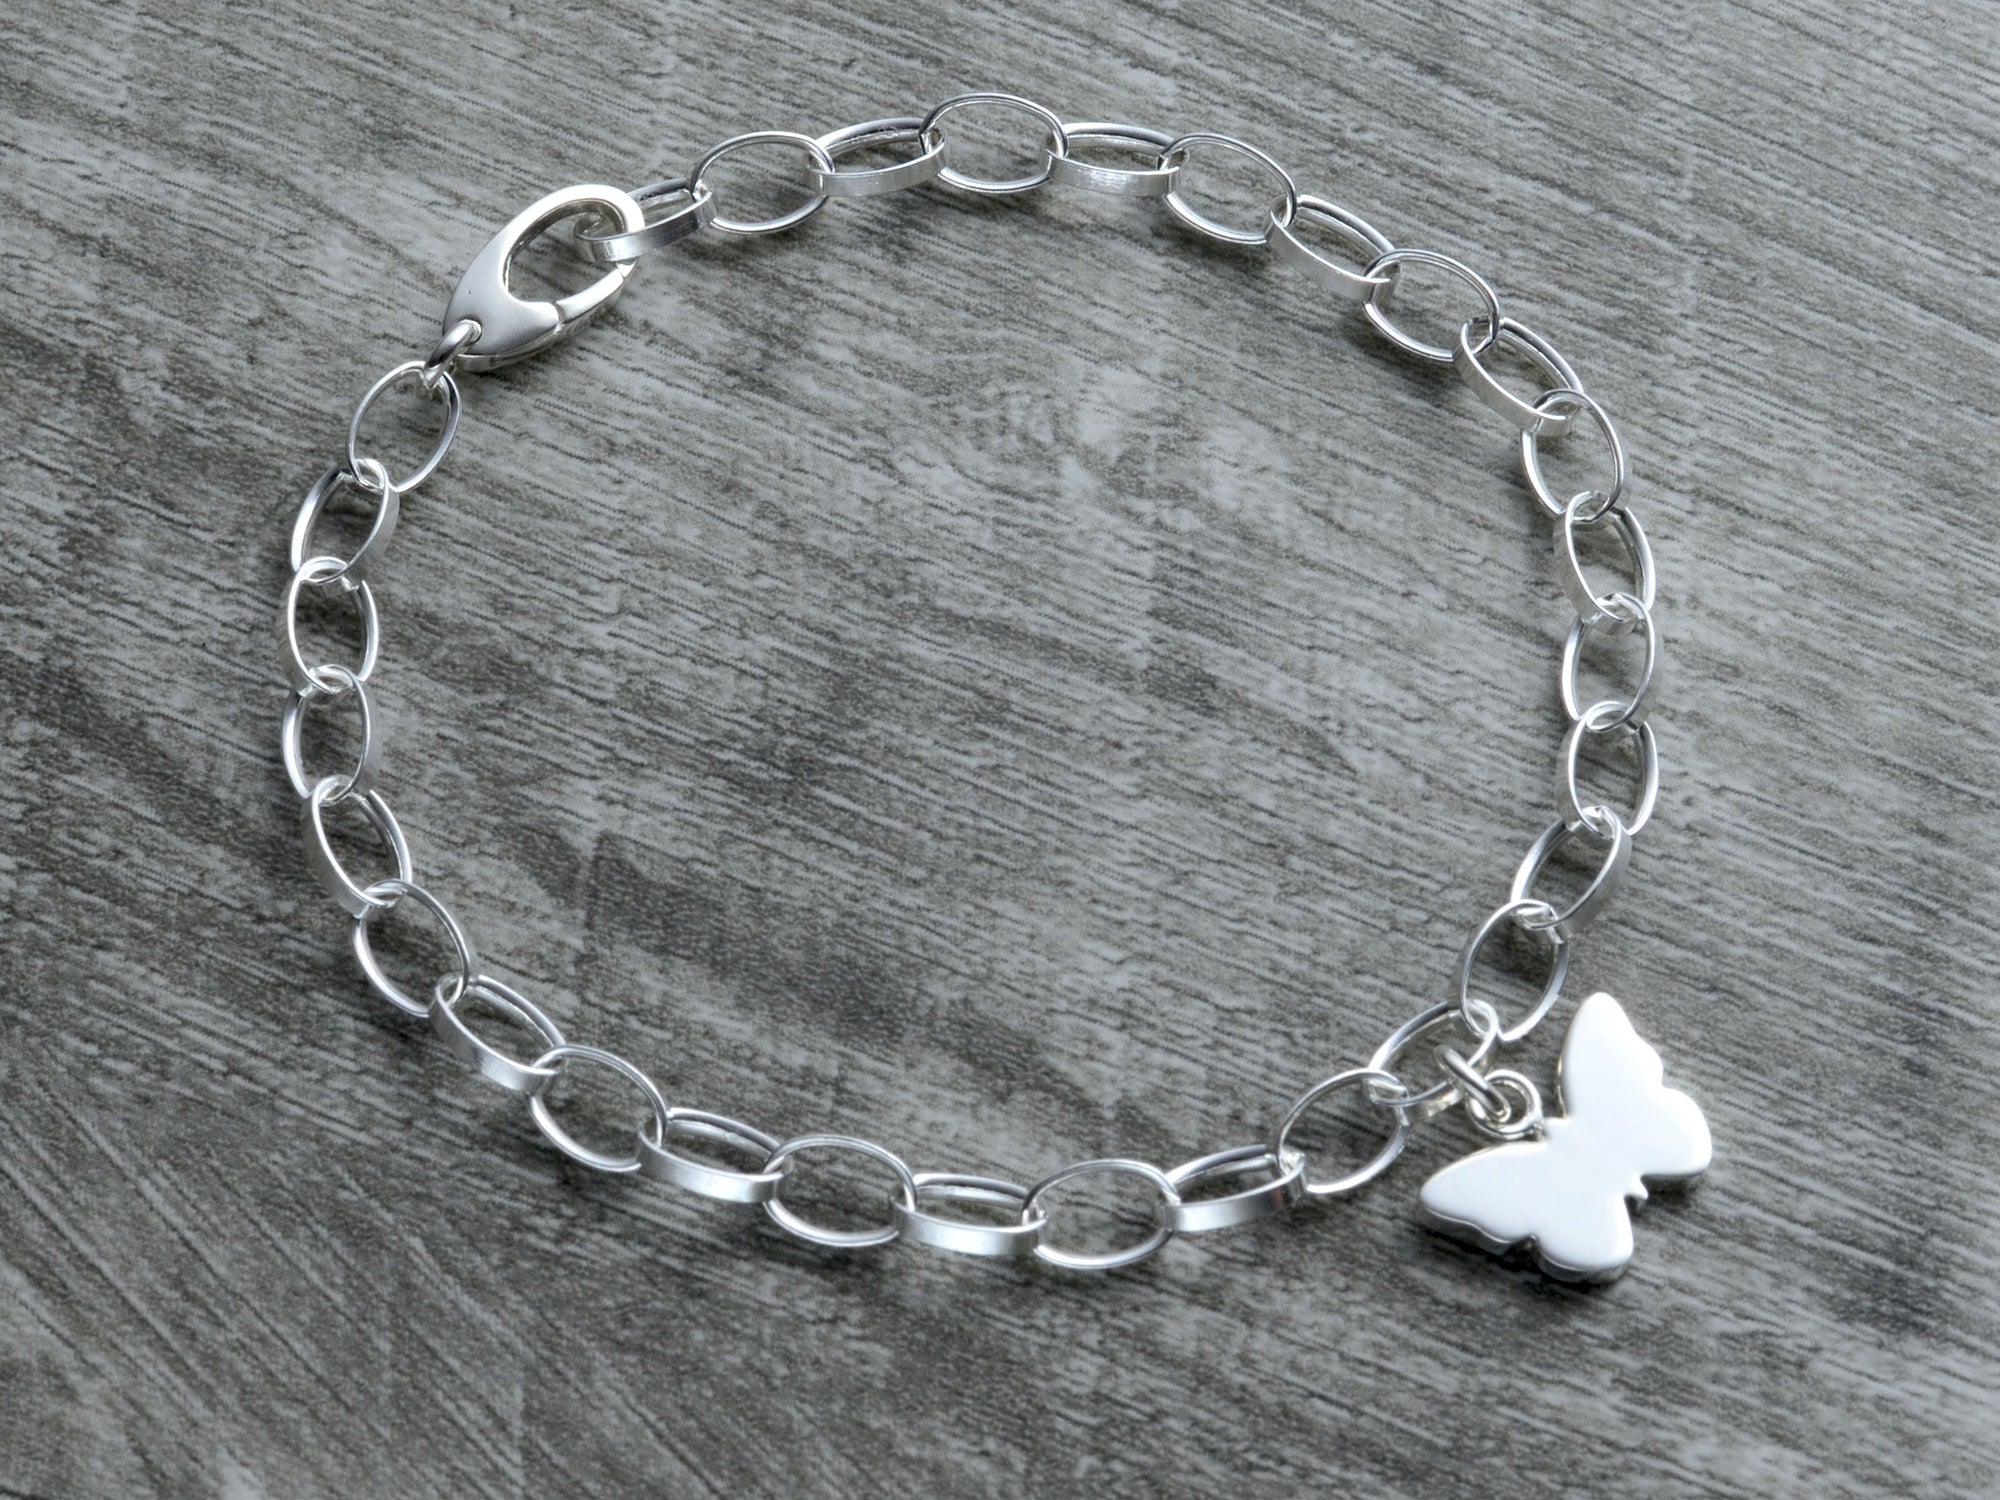 What Are Charm Bracelets & What Do They Mean? - Wellesley Row